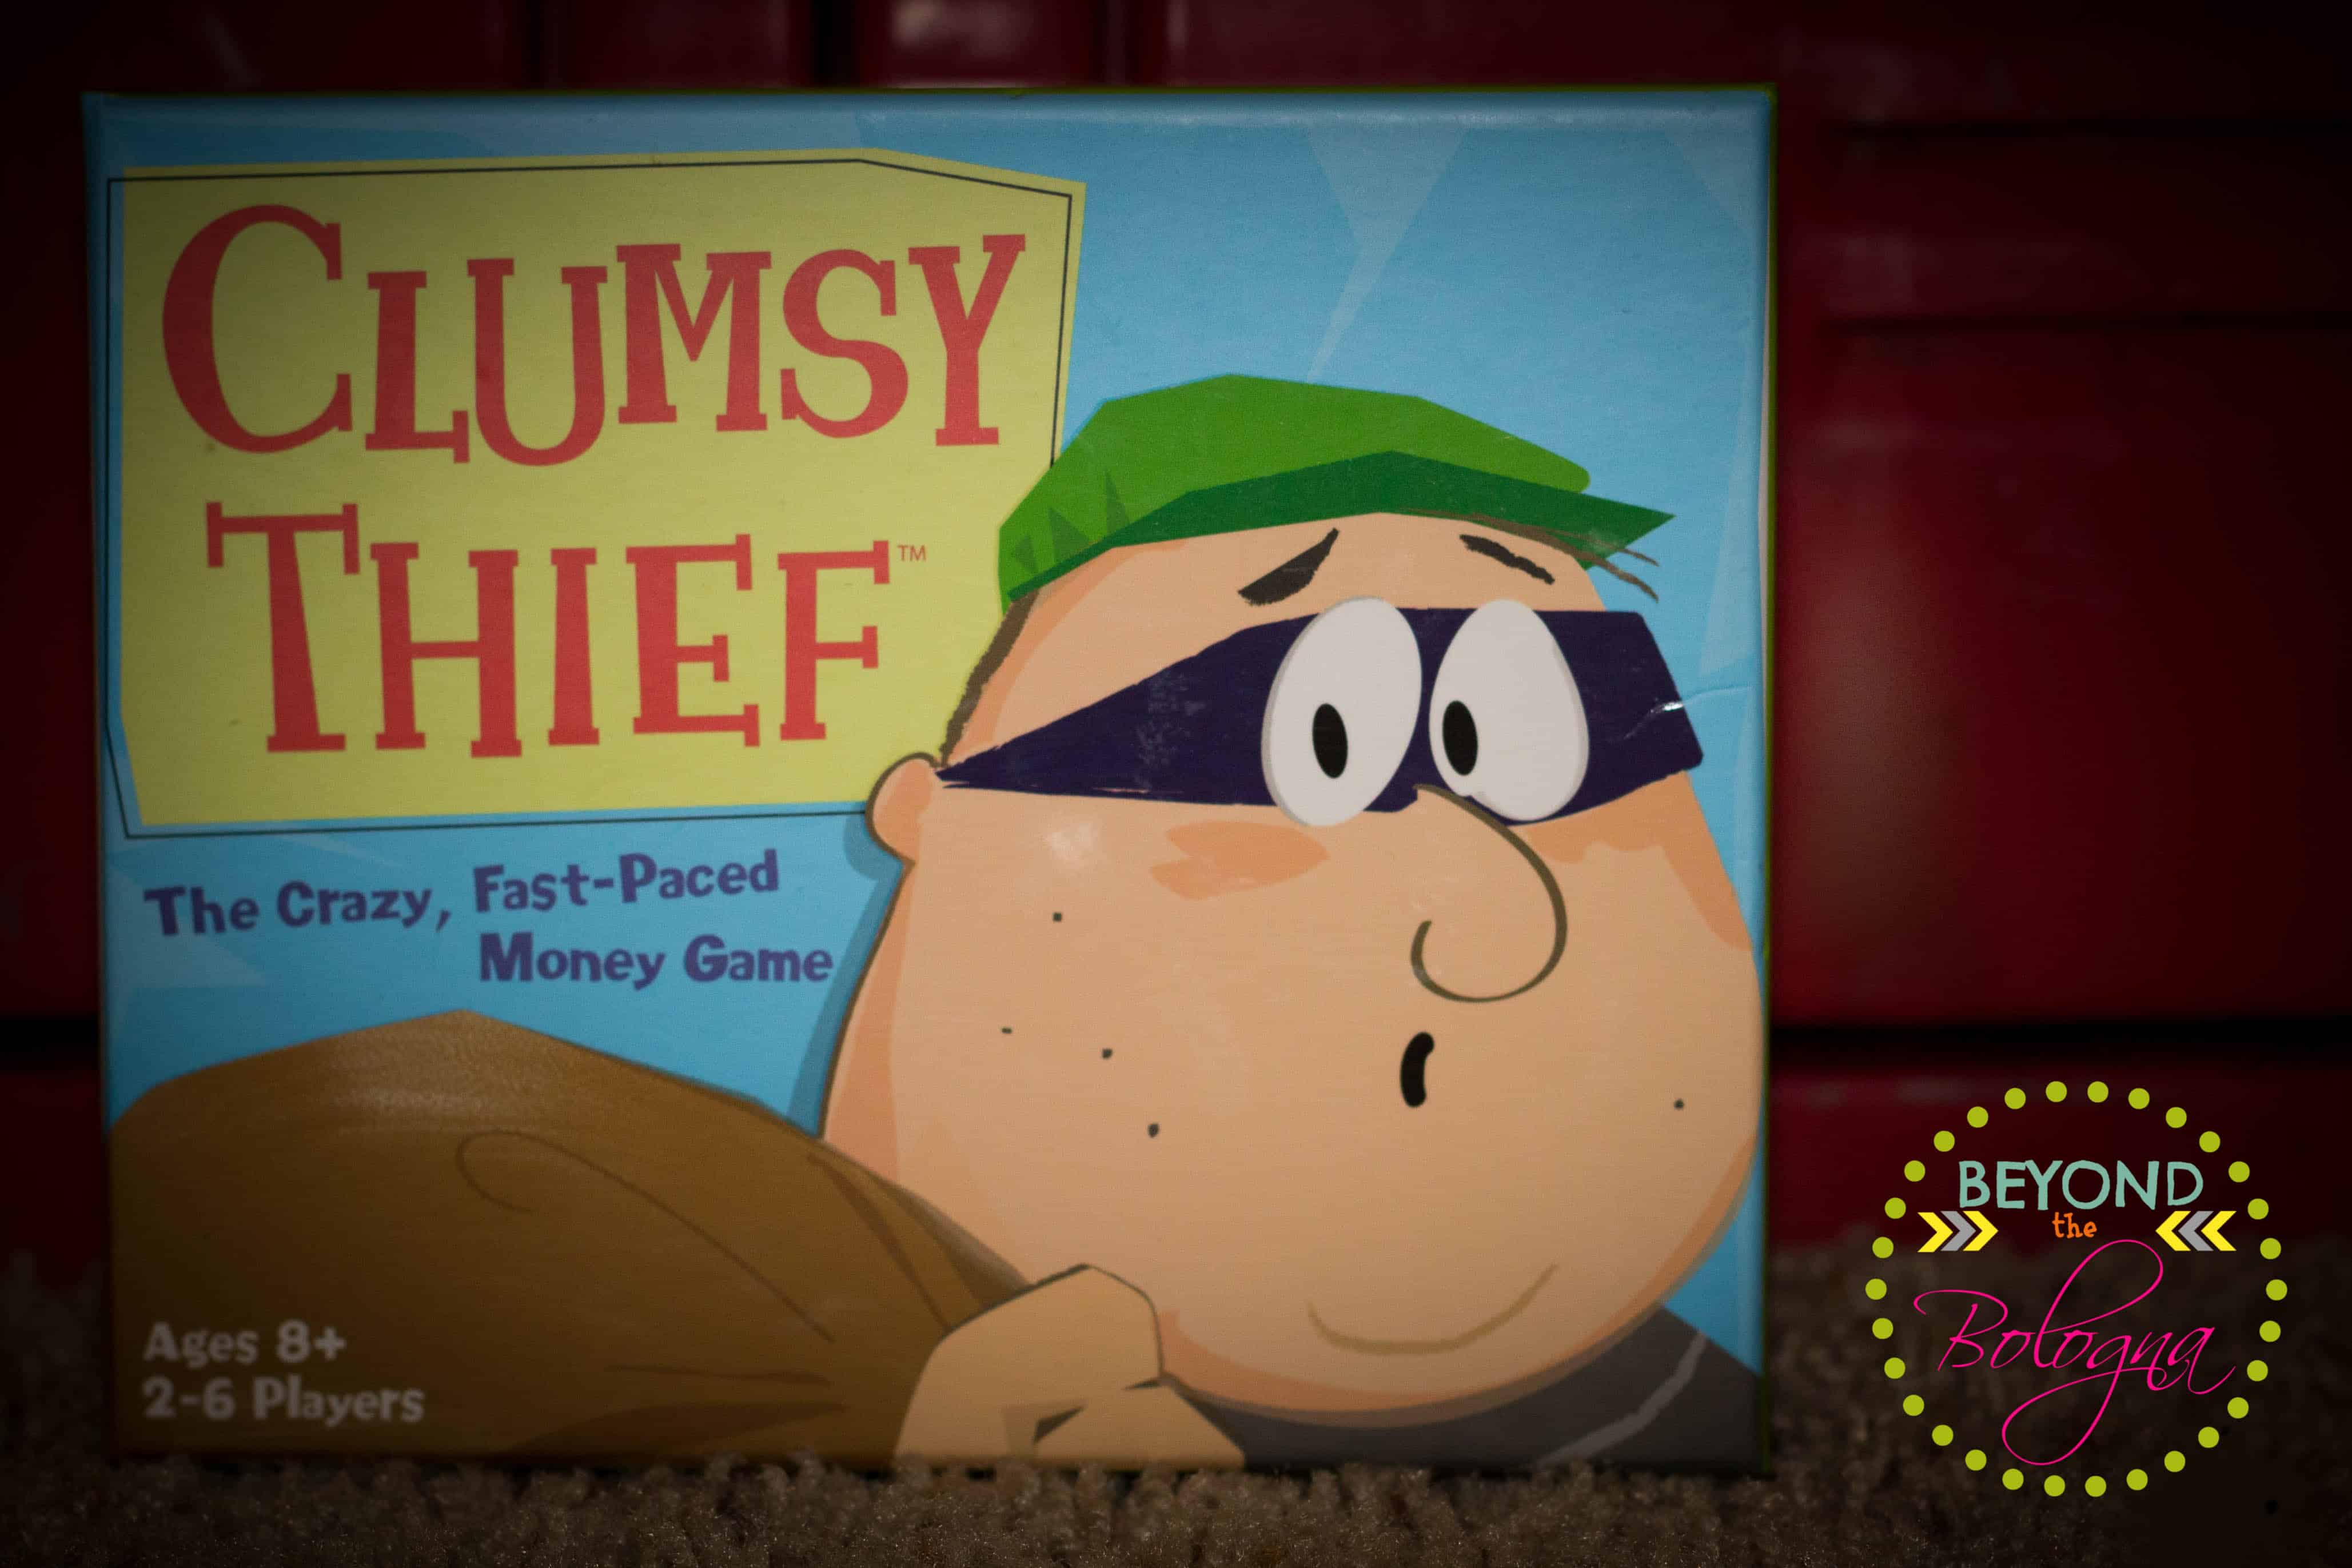 Clumsy Thief: A fun addition to any game night. Don't forget to check out Say Cheese Cafe for more learning fun!